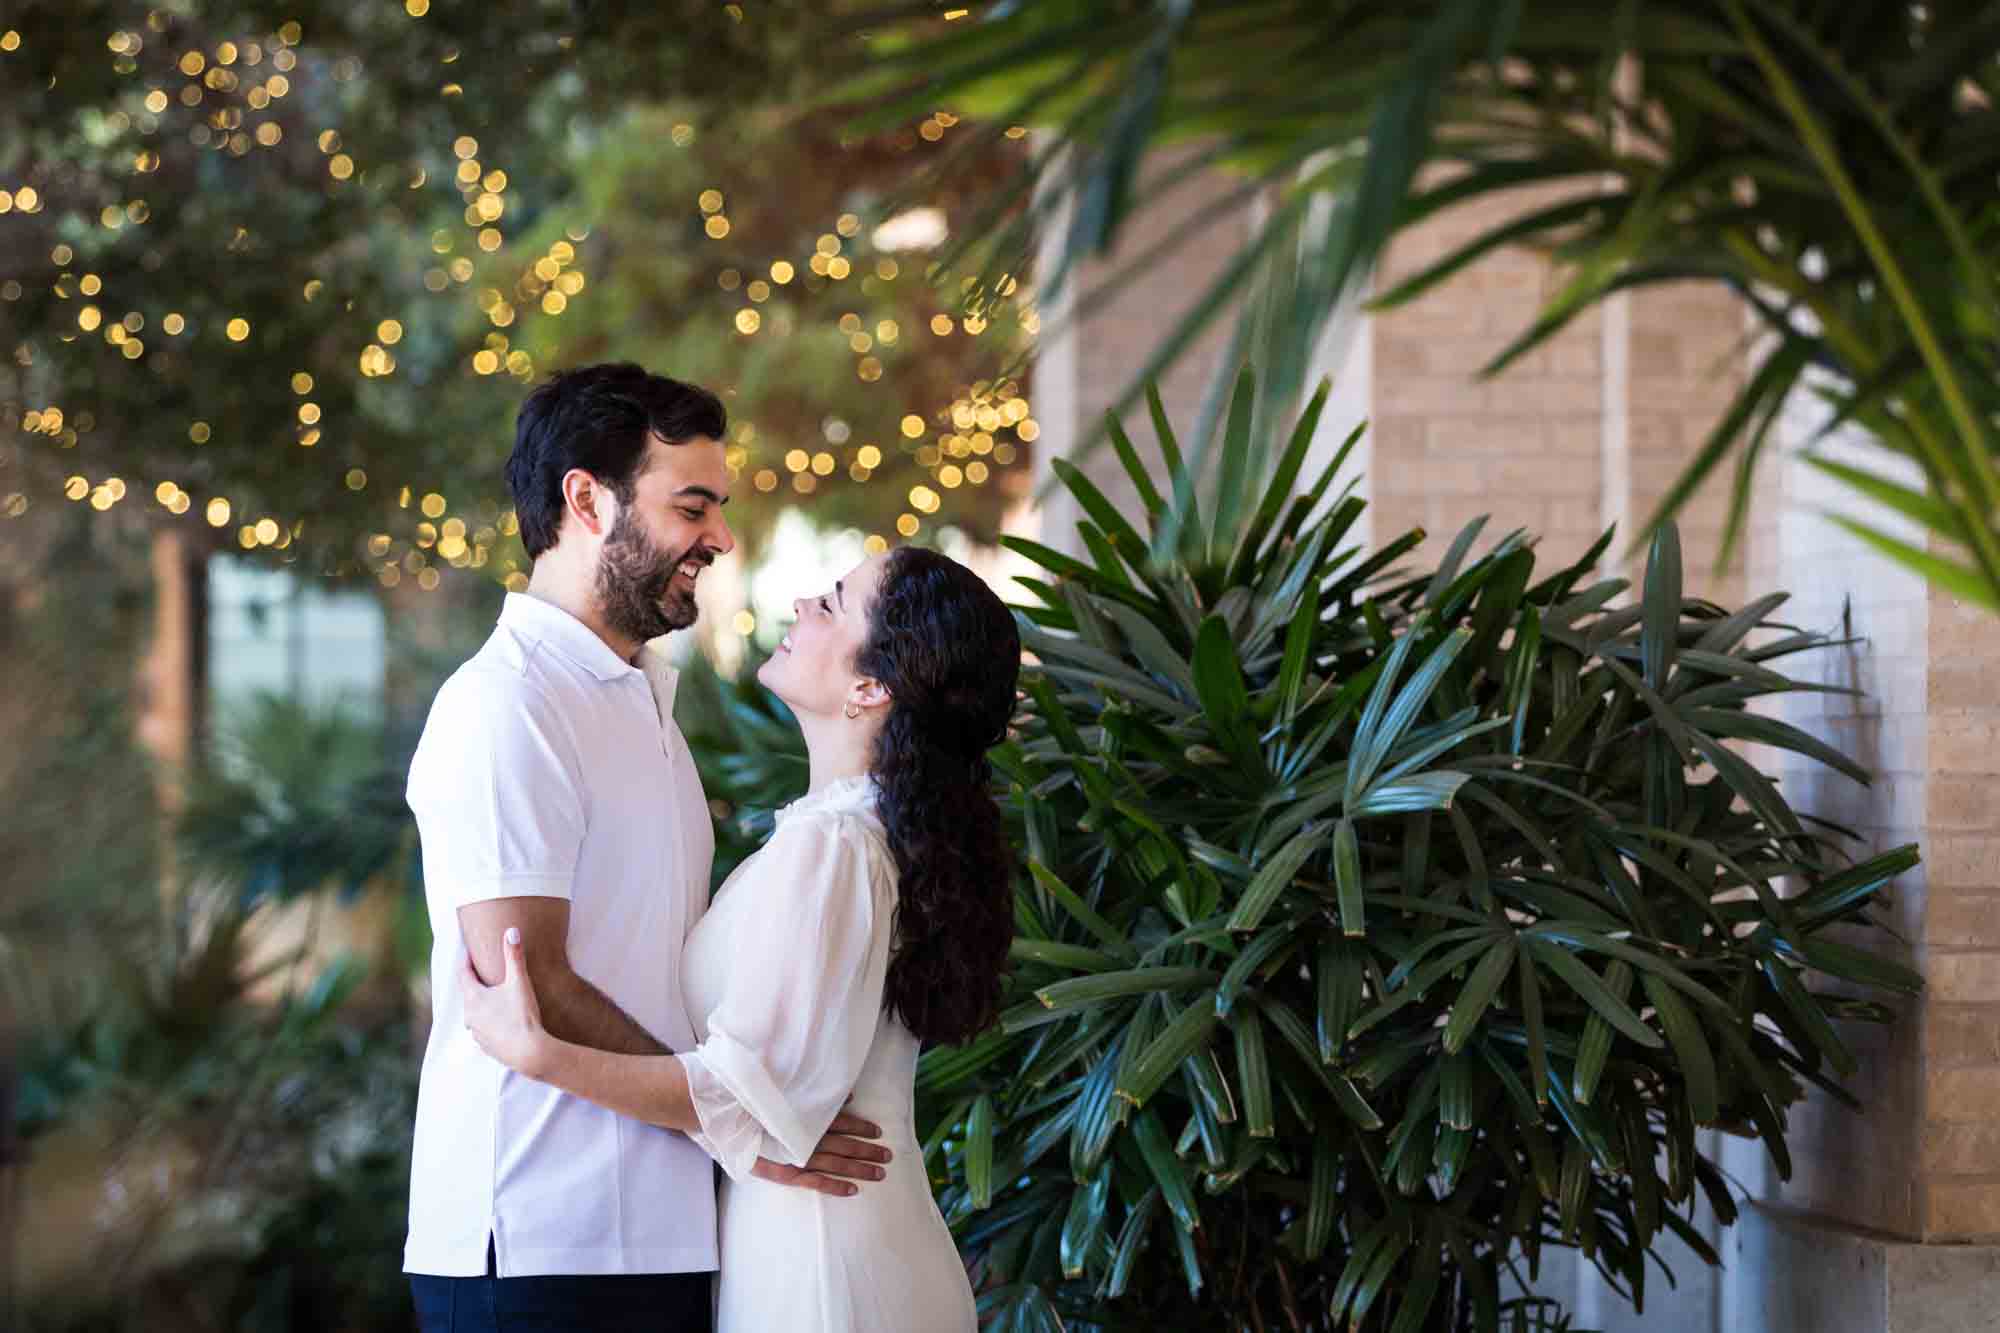 Couple dancing in front of palm trees during a Pearl engagement portrait session